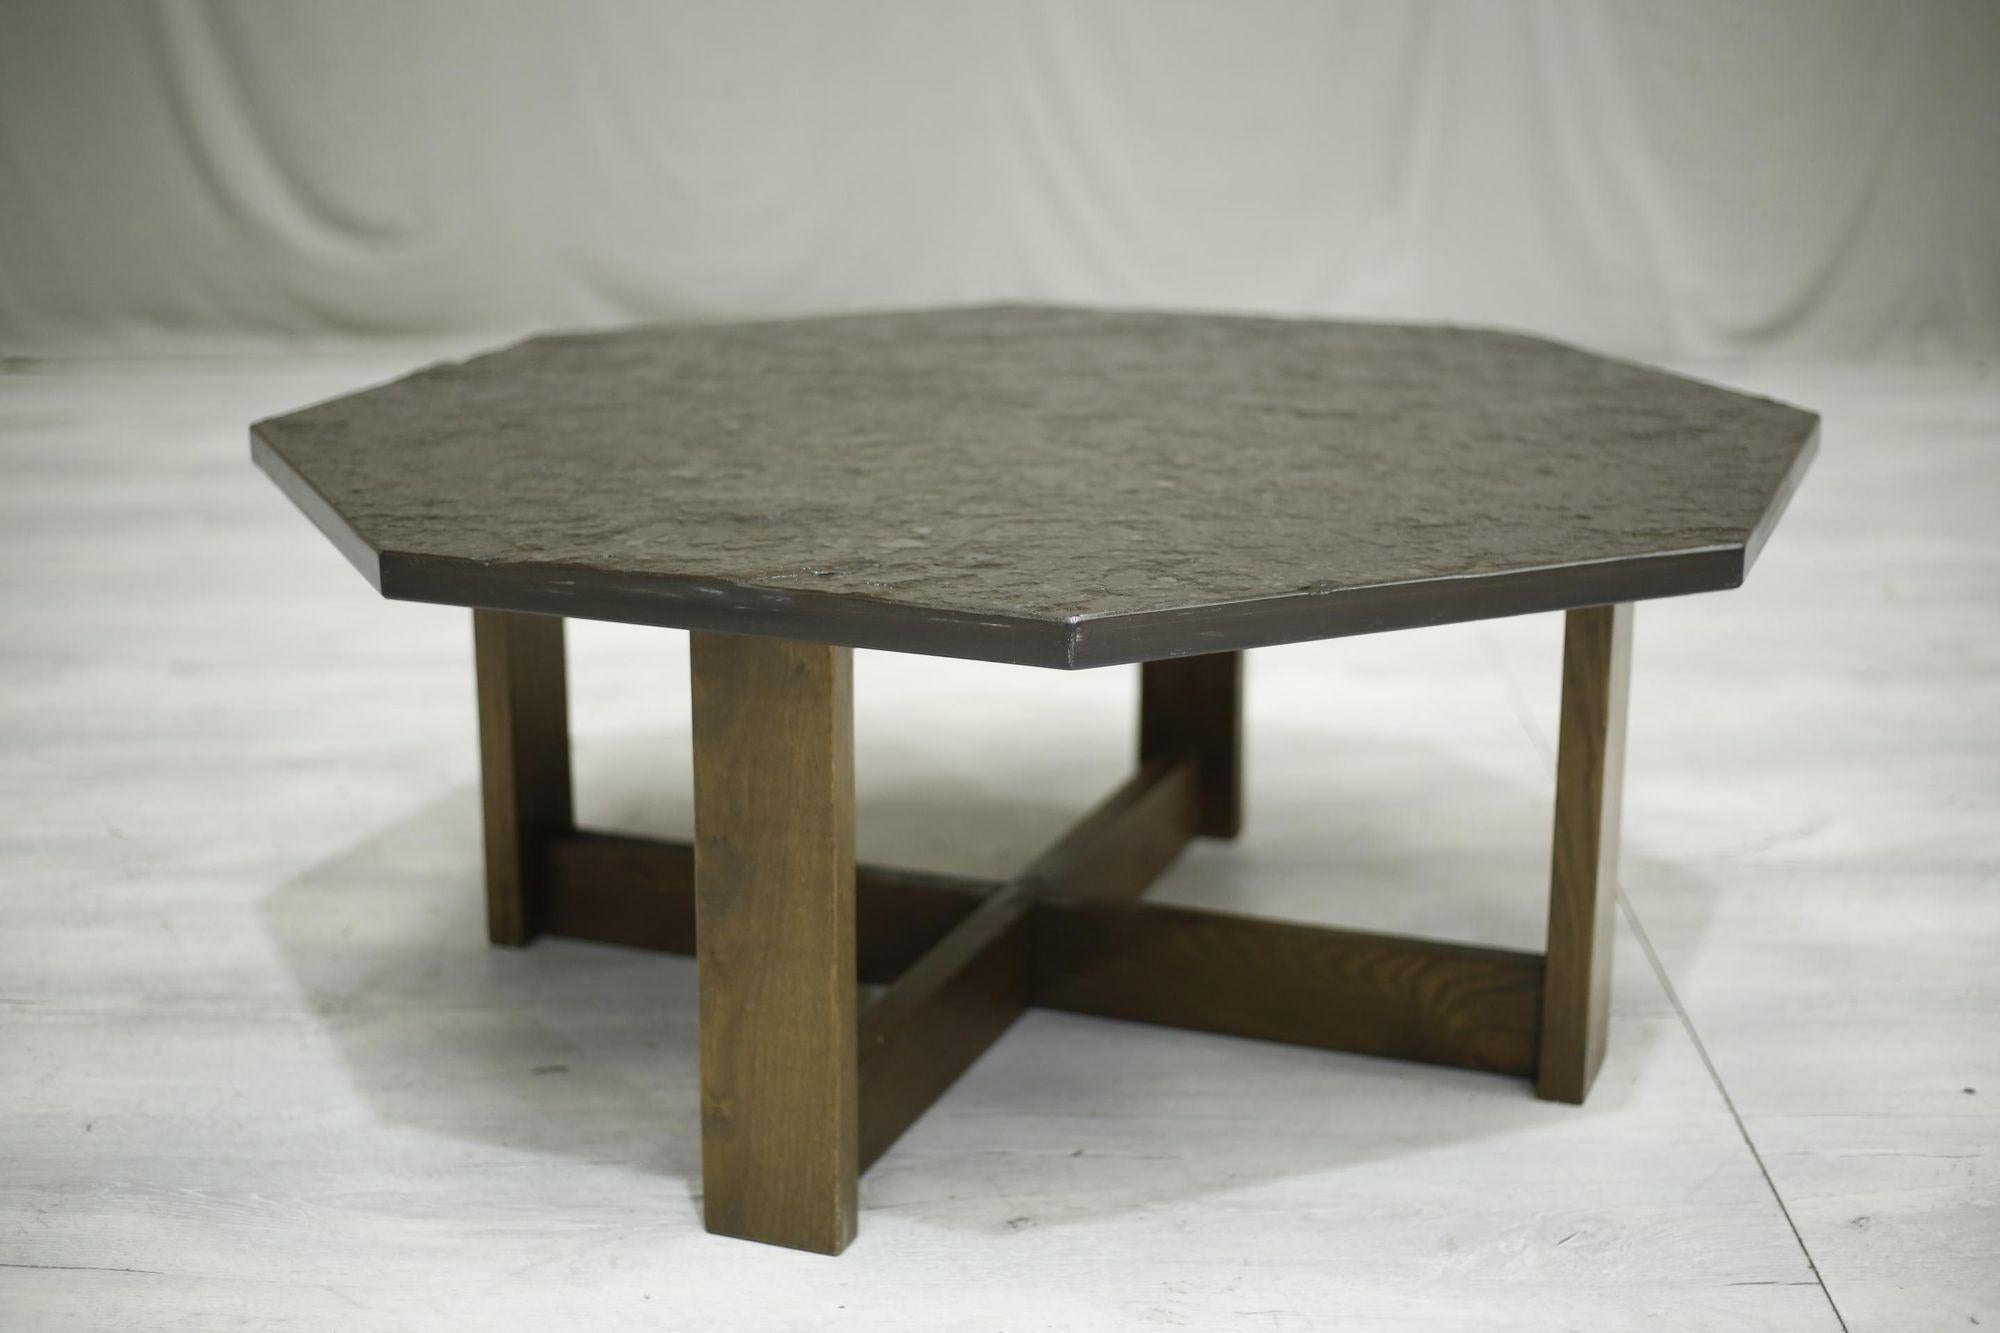 This is a very stylish mid 20th century stone and oak coffee table. The top is riven stone which looks like a form of slate. The colour is superb as it is a warm brown grey which suits the wooden base very nicely. Good size as well making it a real